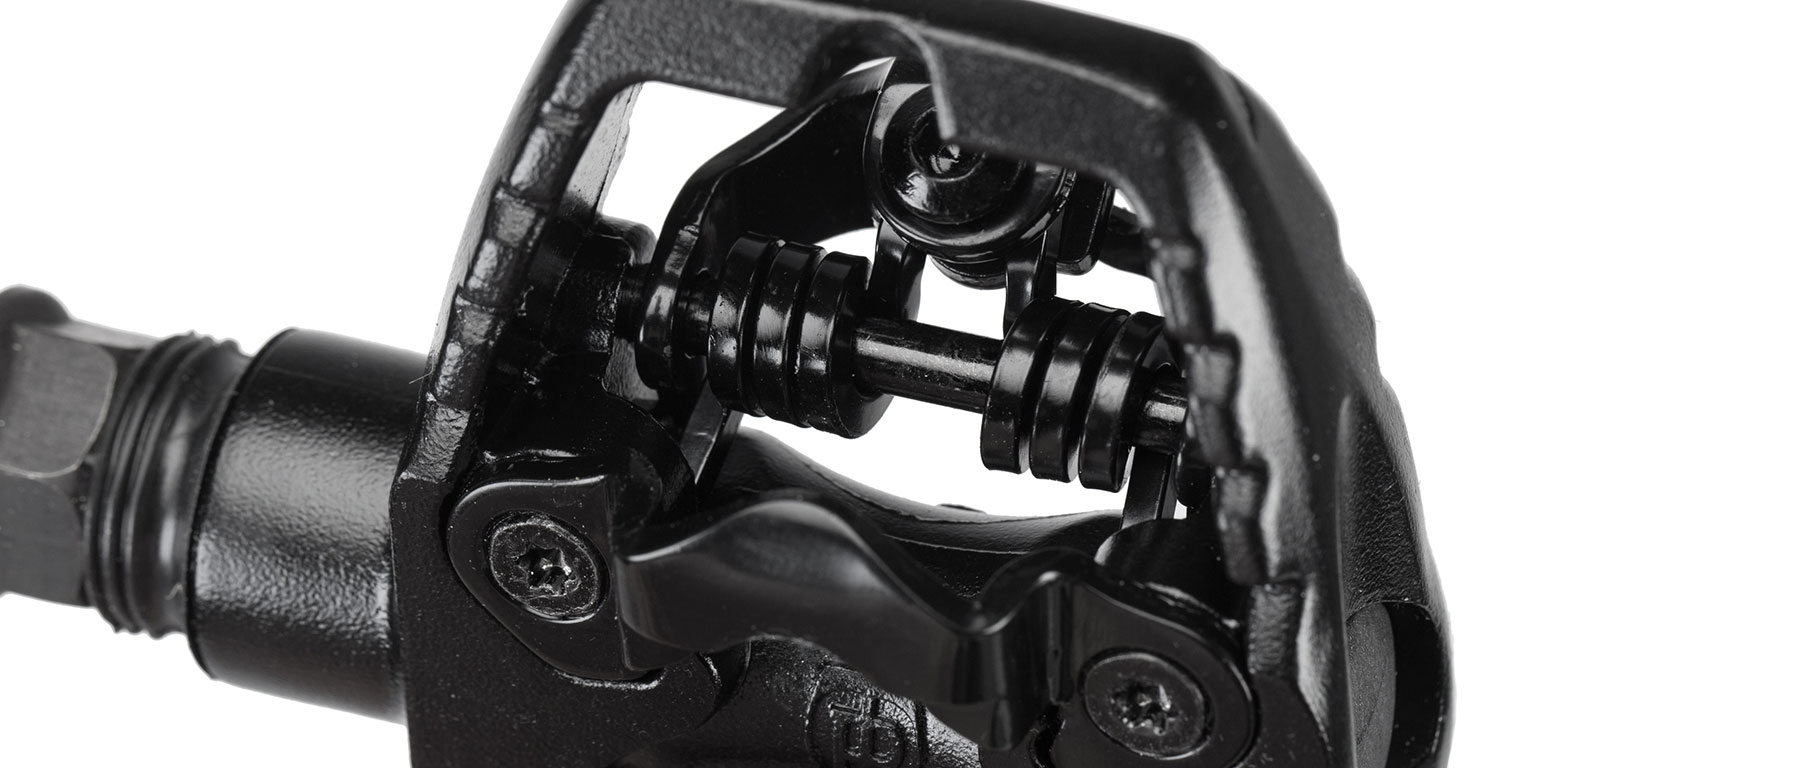 Ritchey Comp Trail Pedals